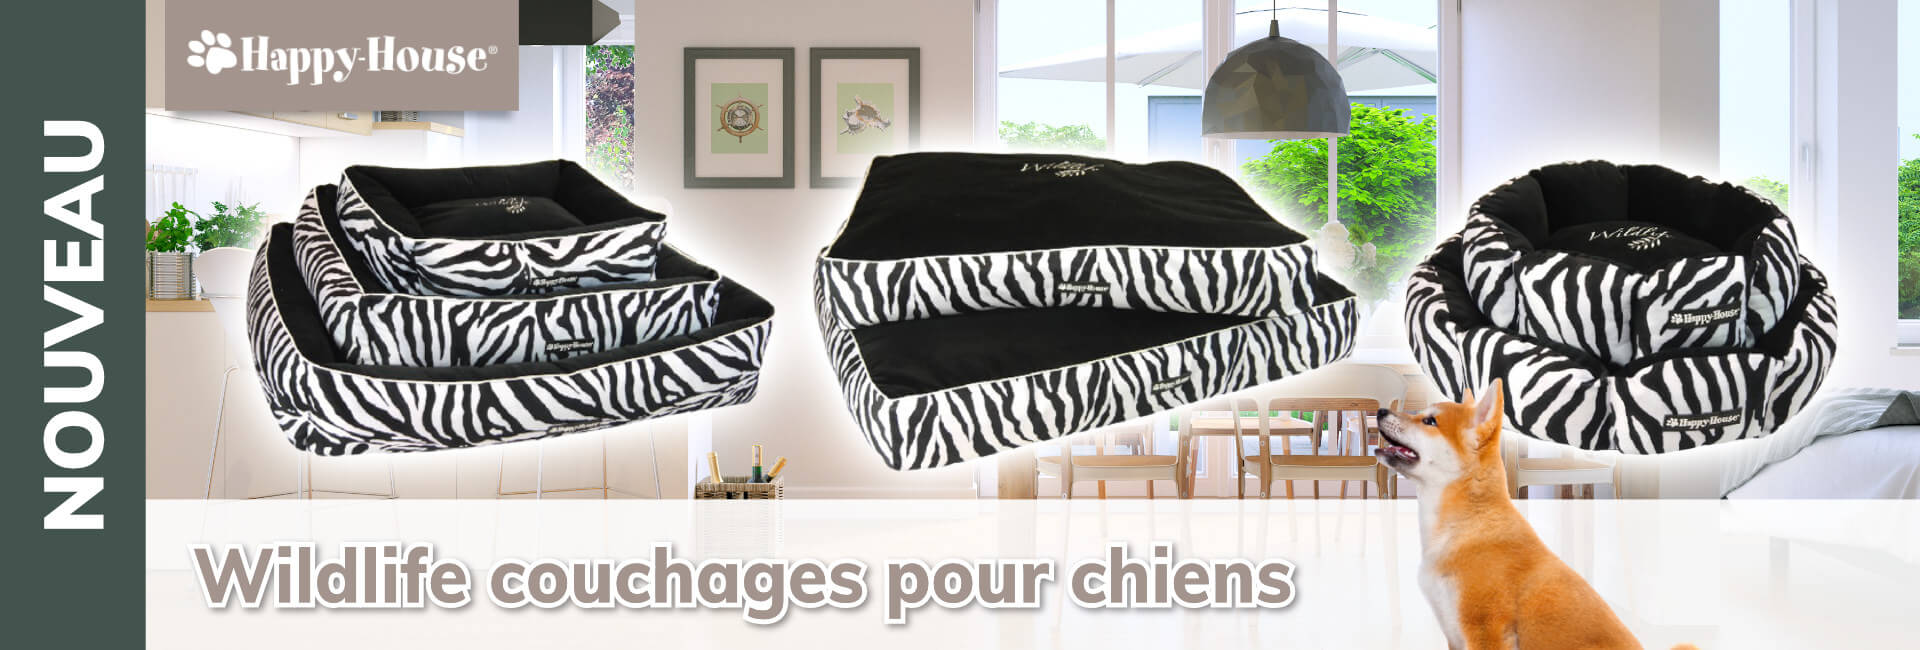 Happy-House Wildlife couchages pour chiens